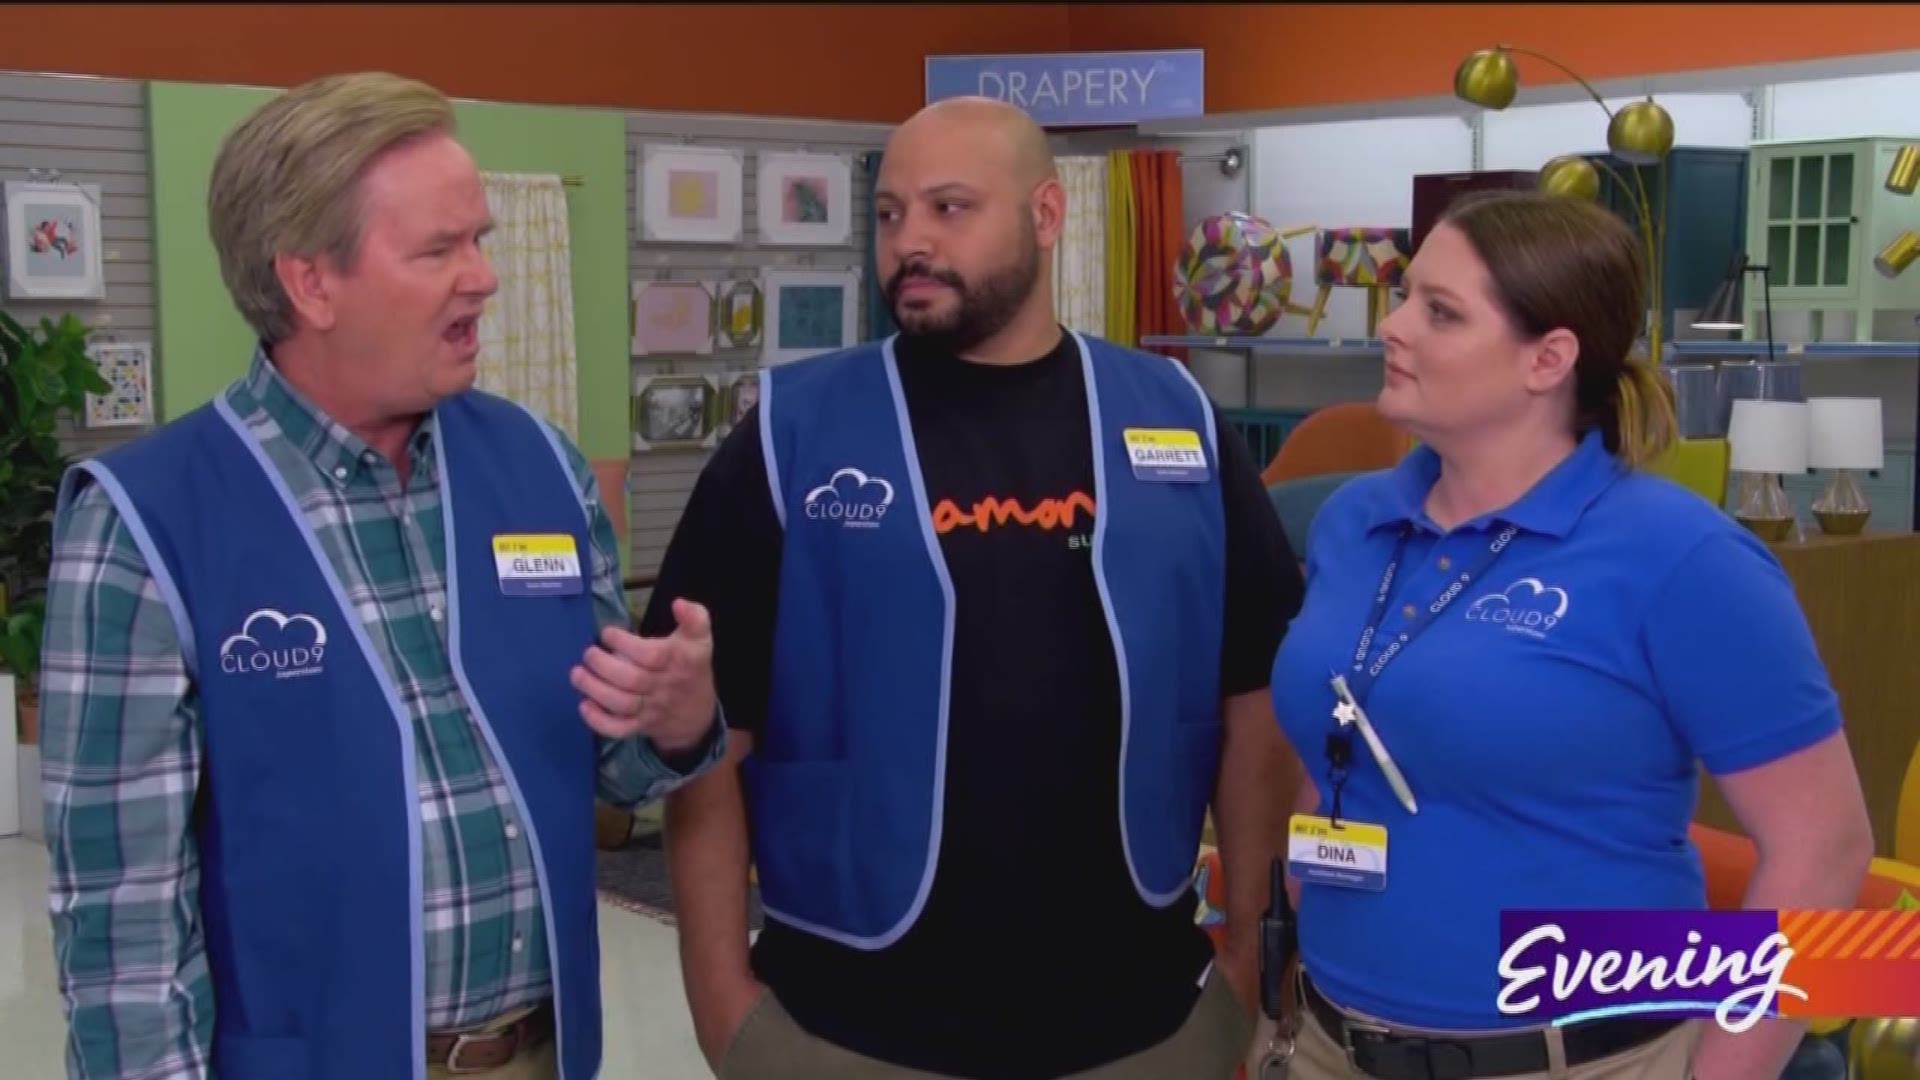 Superstore (@nbcsuperstore) • Instagram photos and videos